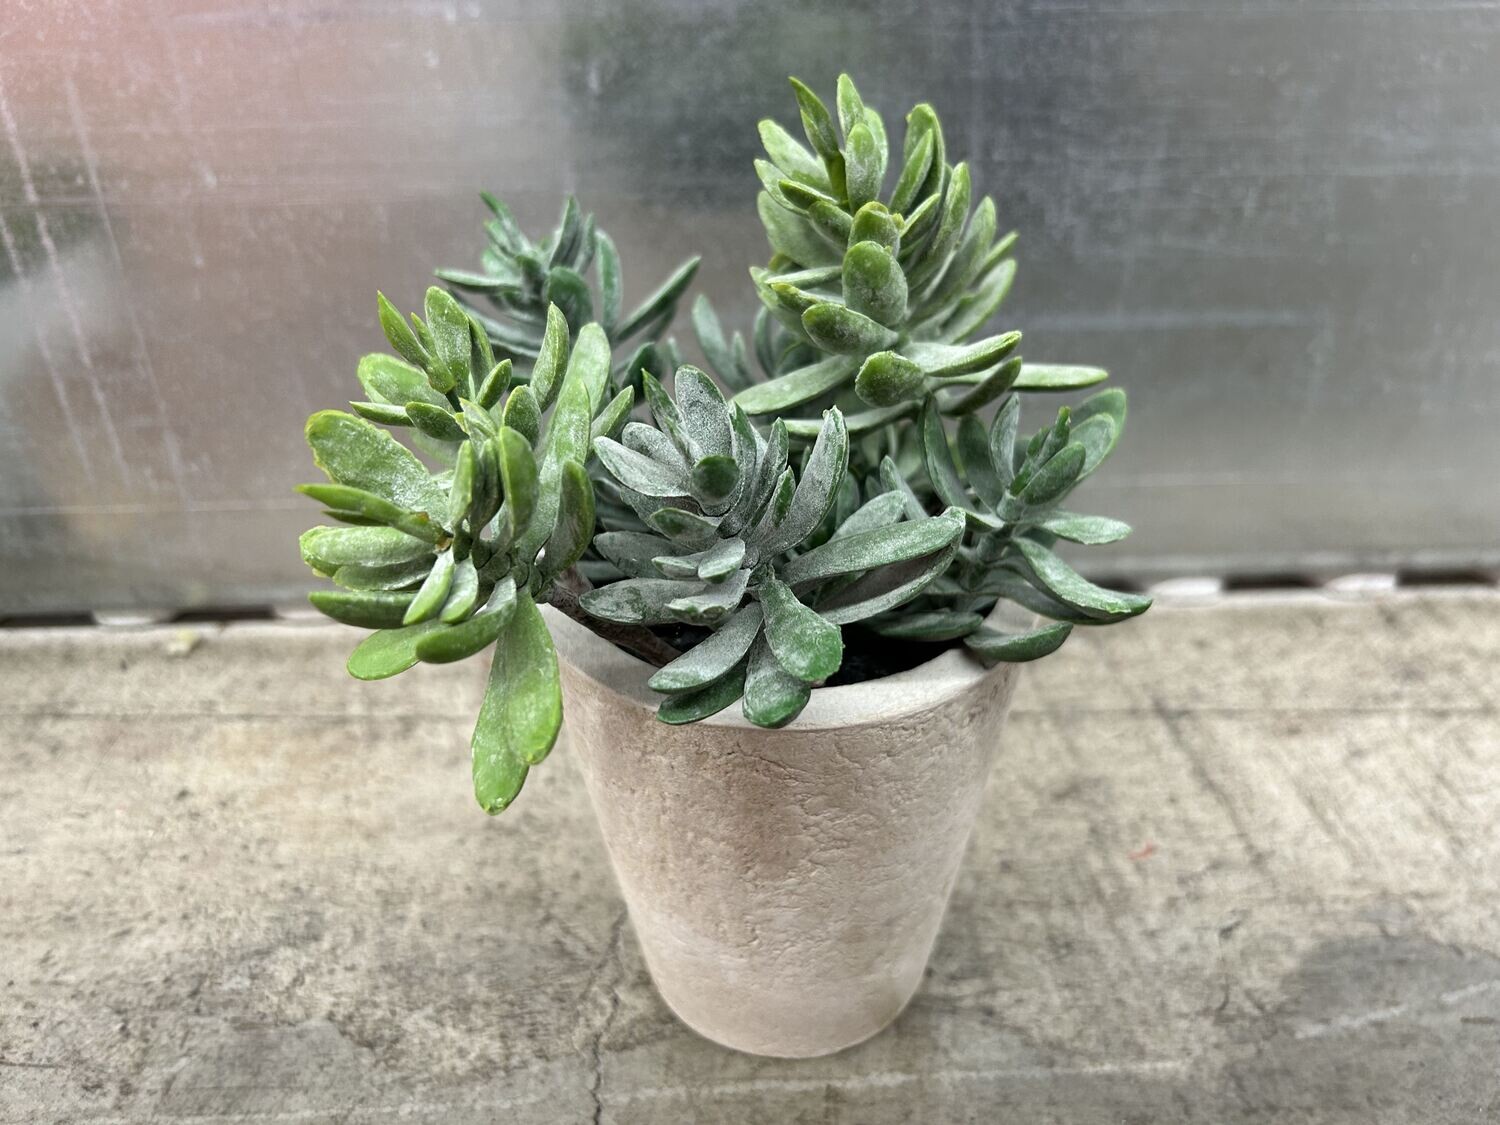 Like New! Planter, tan resin w/ artificial Jade Plant #2314 ** 3 days to sell, full price